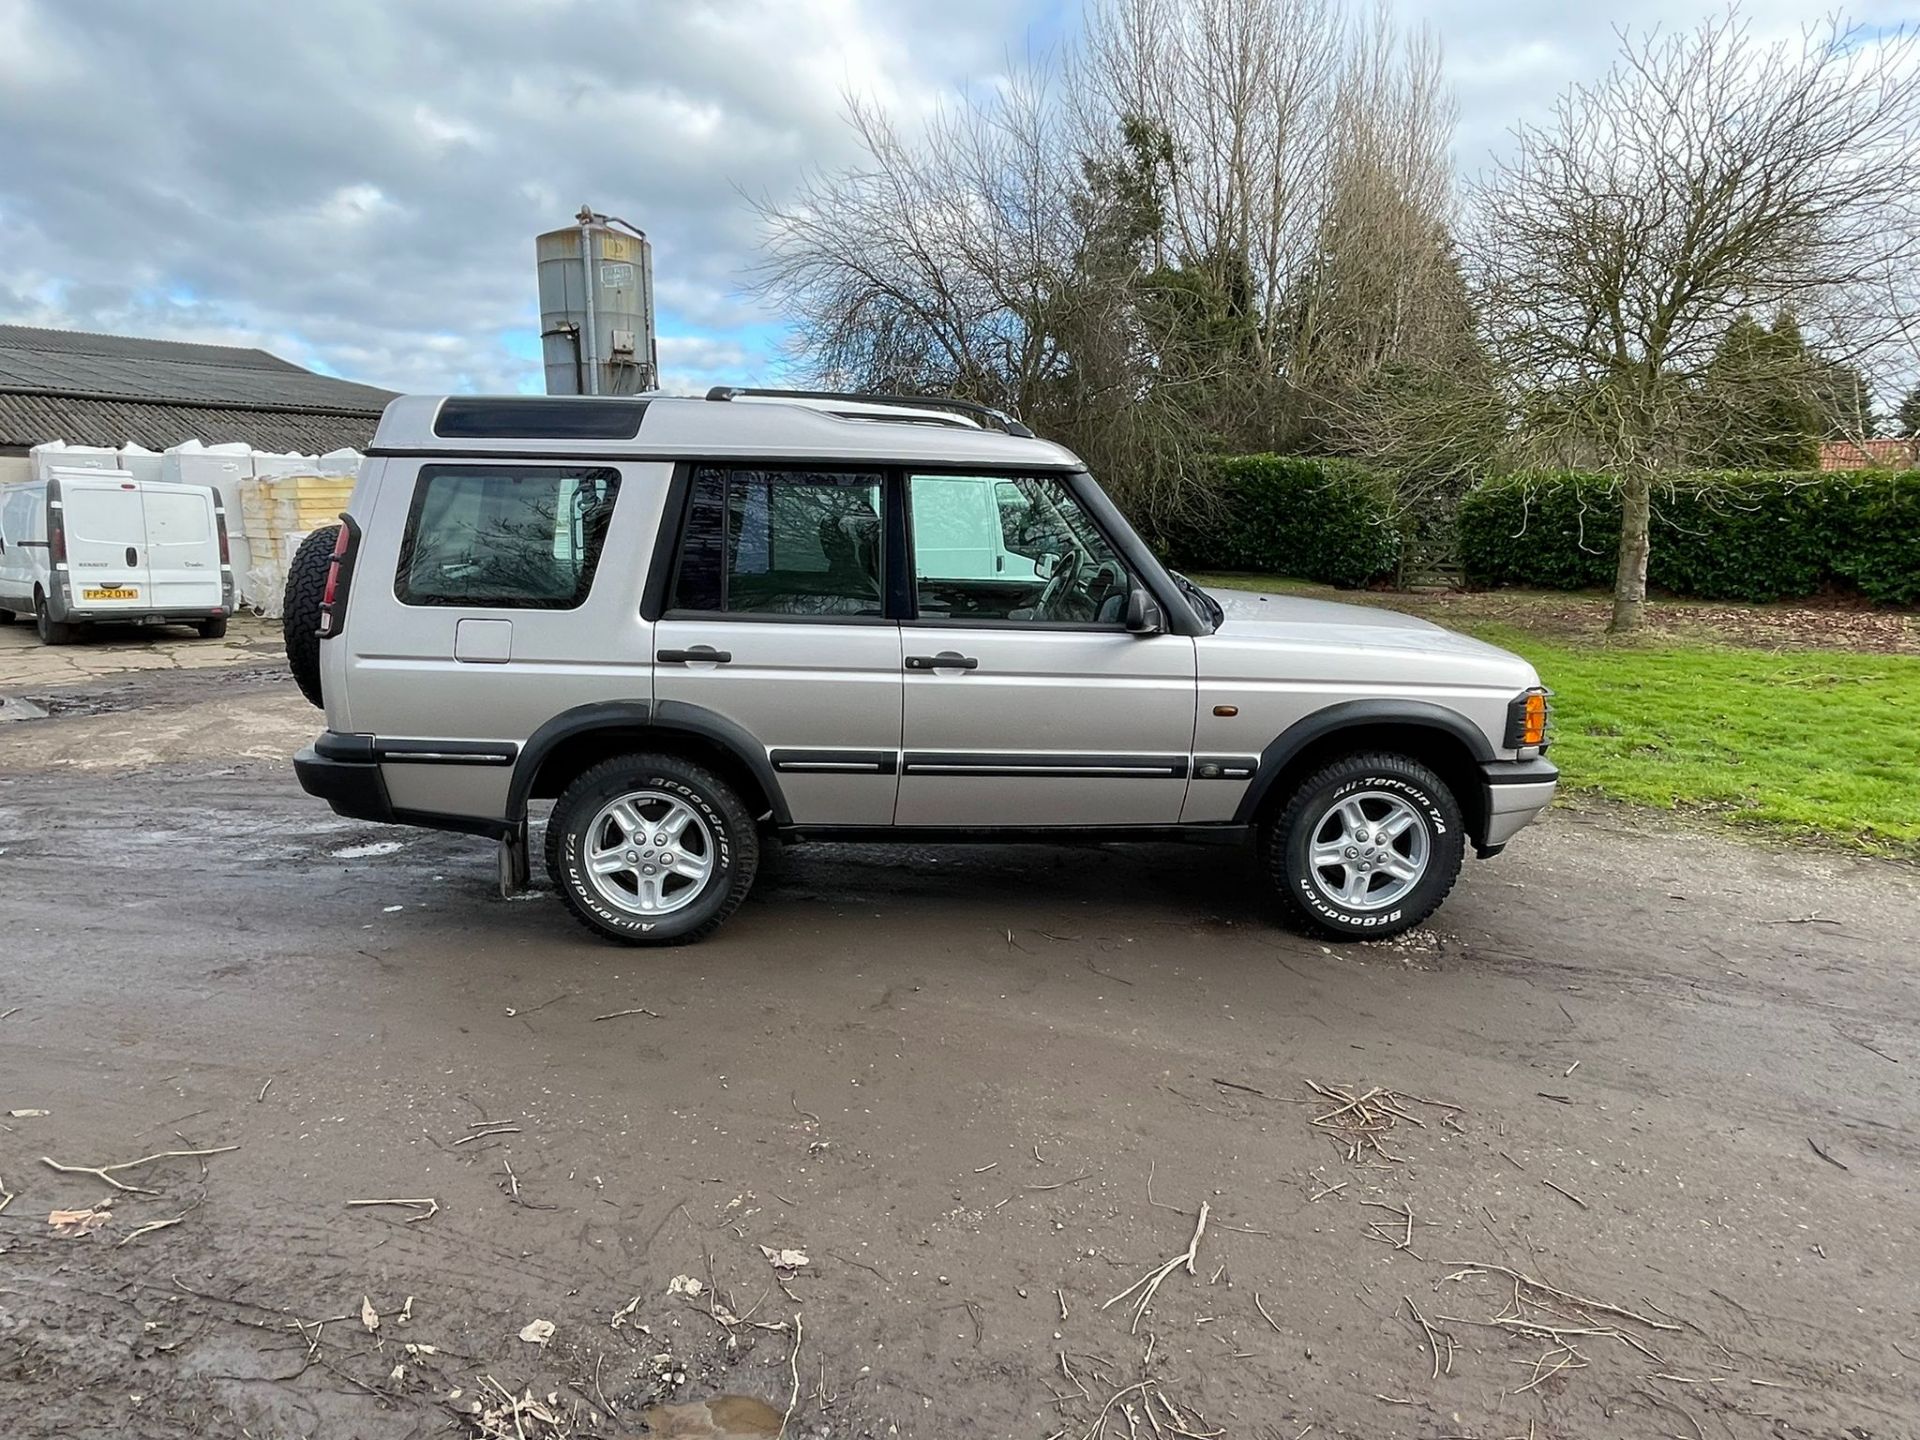 2000 LAND ROVER DISCOVERY TD5 ES SILVER ESTATE, 271,031 MILES, GALVANISED CHASSIS *NO VAT* - Image 8 of 17